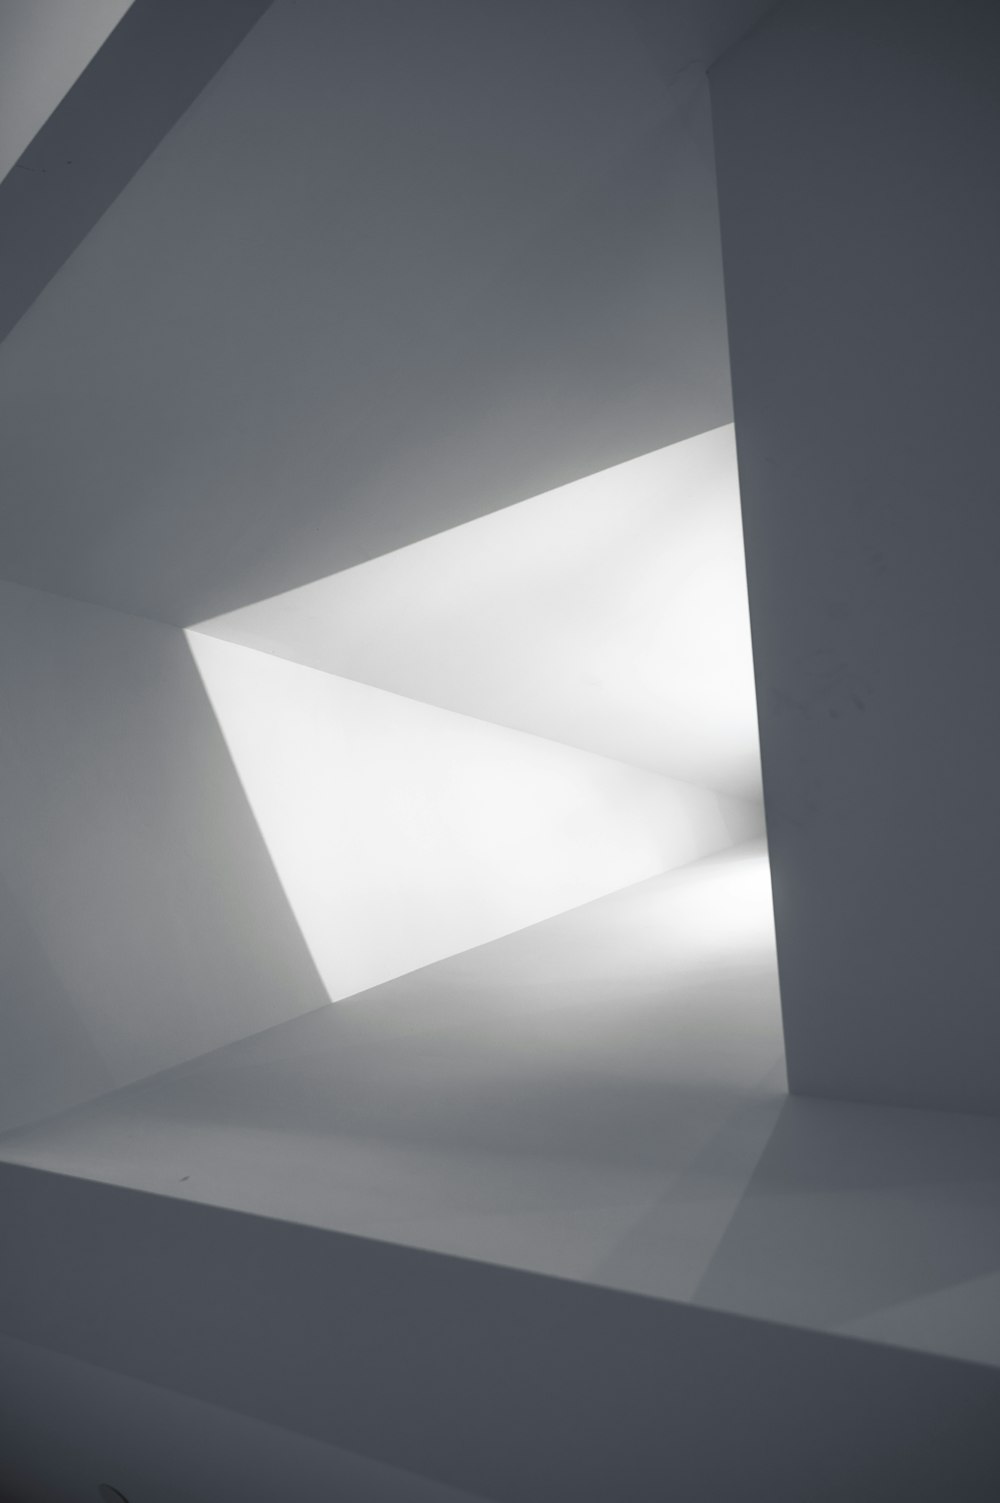 a white room with a light coming through the ceiling